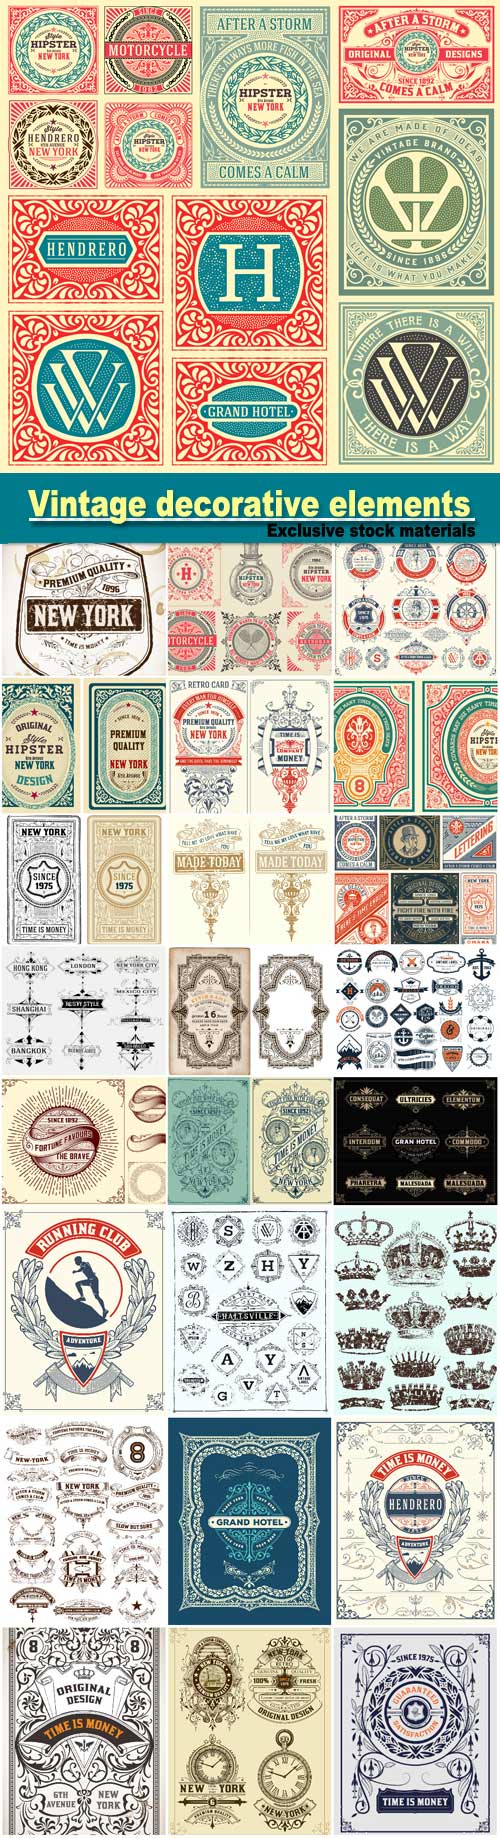 Vintage decorative elements in the vector, labels, ornaments